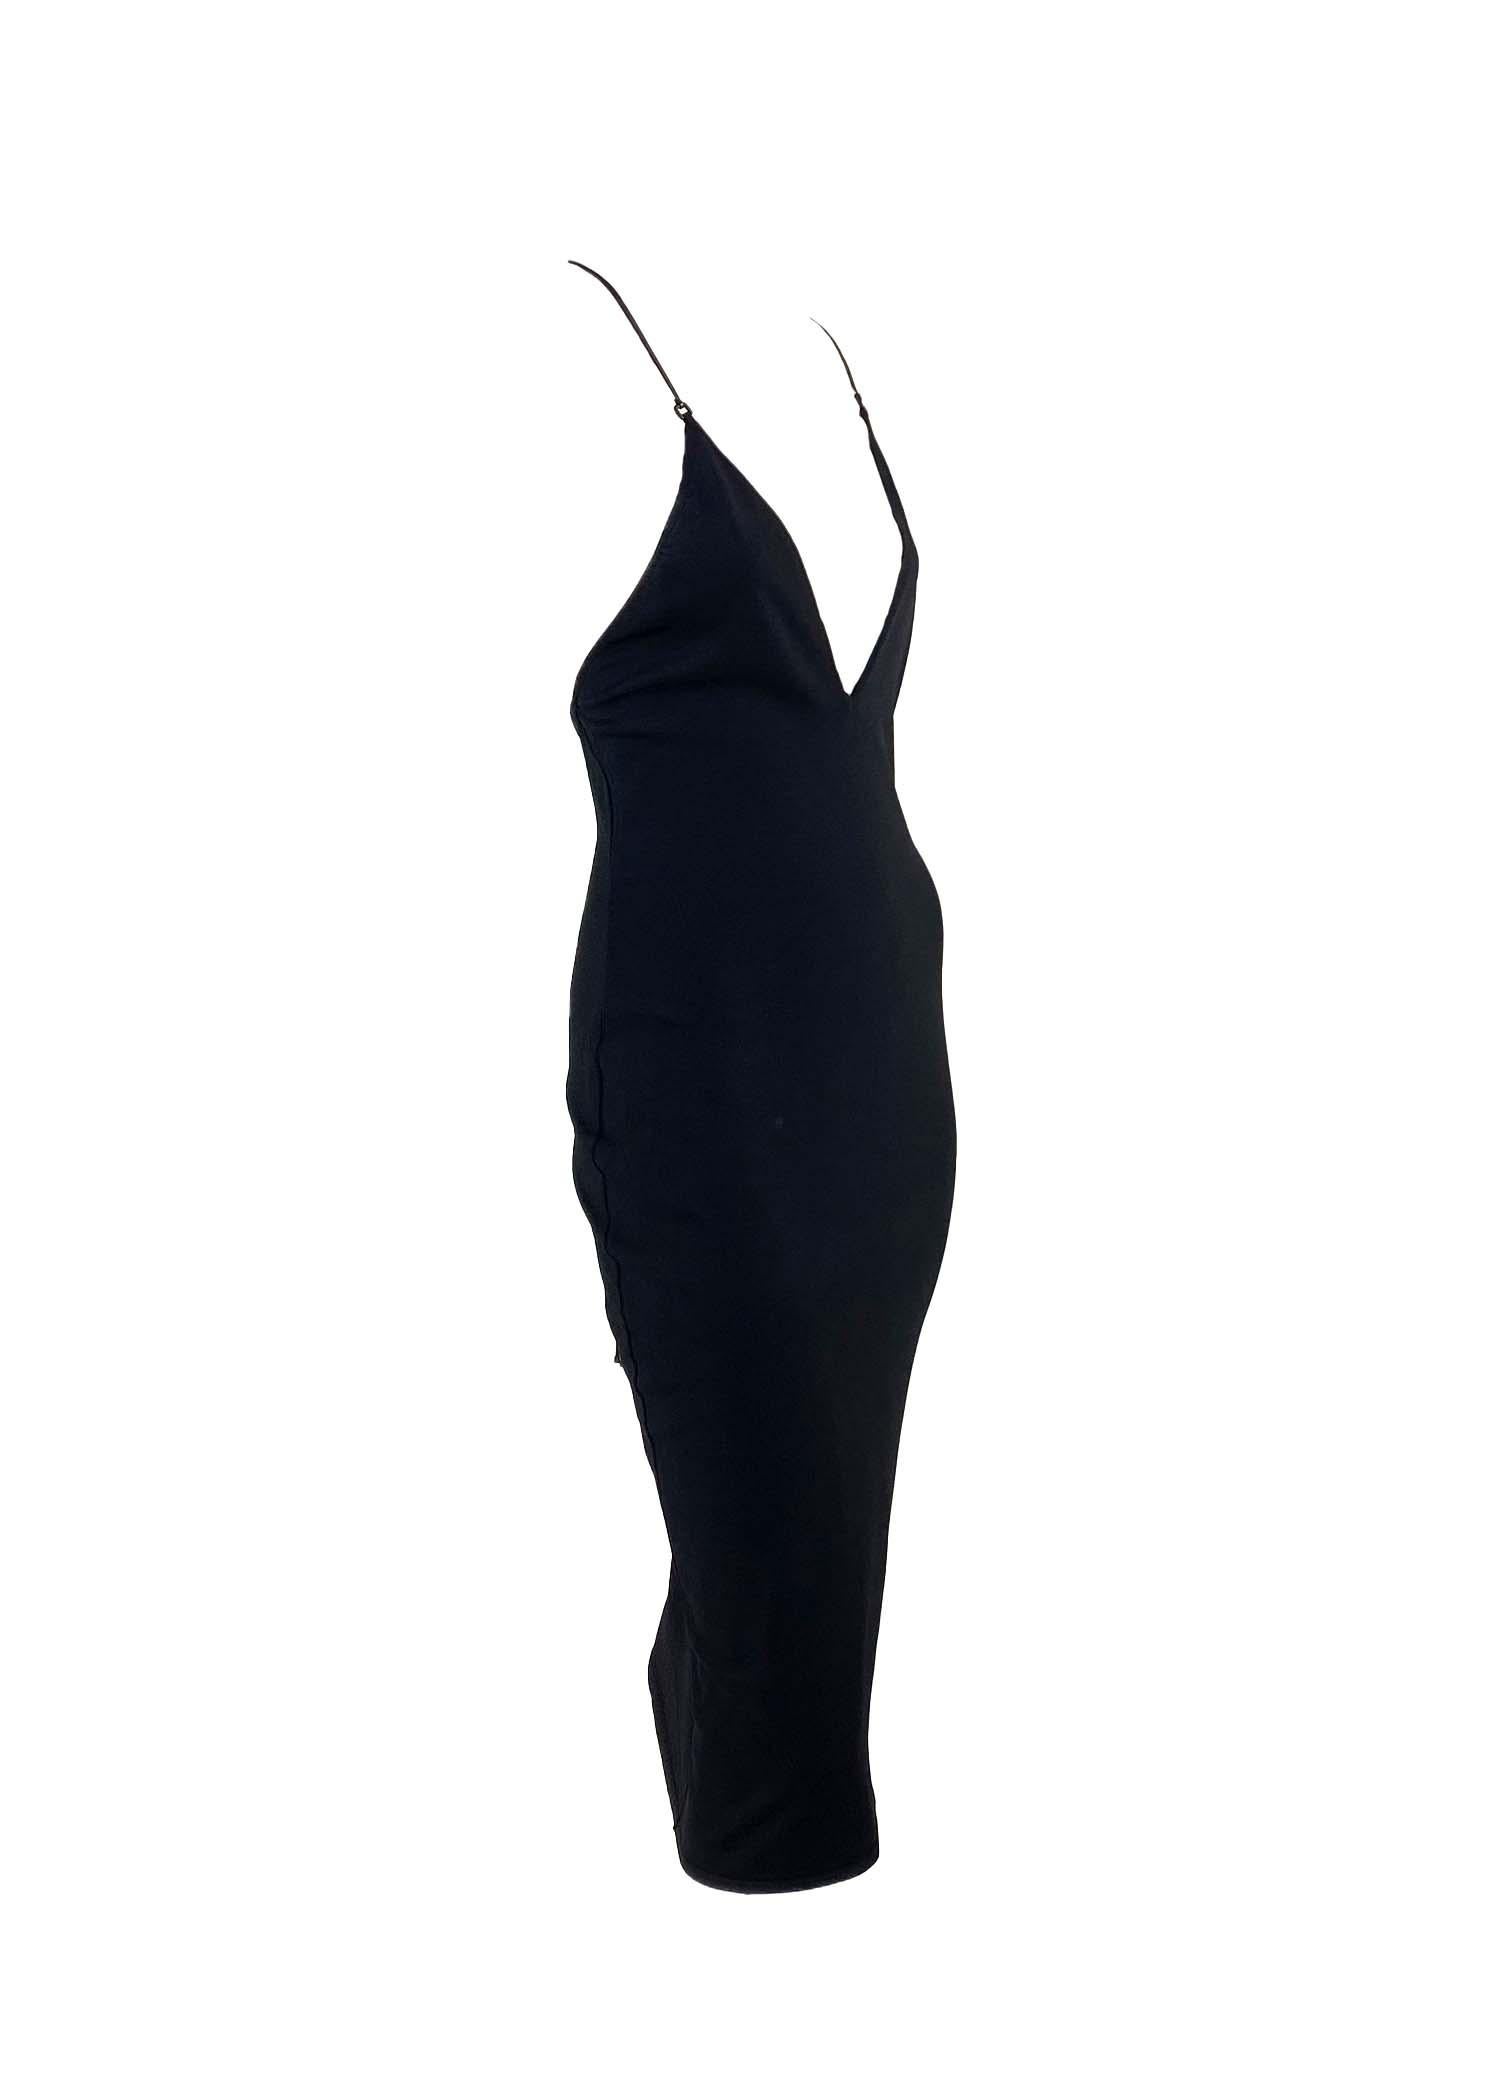 TheRealList presents: a gorgeous leather strapped backless Gucci dress, designed by Tom Ford. This knit form fitting dress features a deep v-neckline which is held up by long leather straps that wrap around the open back. From the Spring/Summer 2000